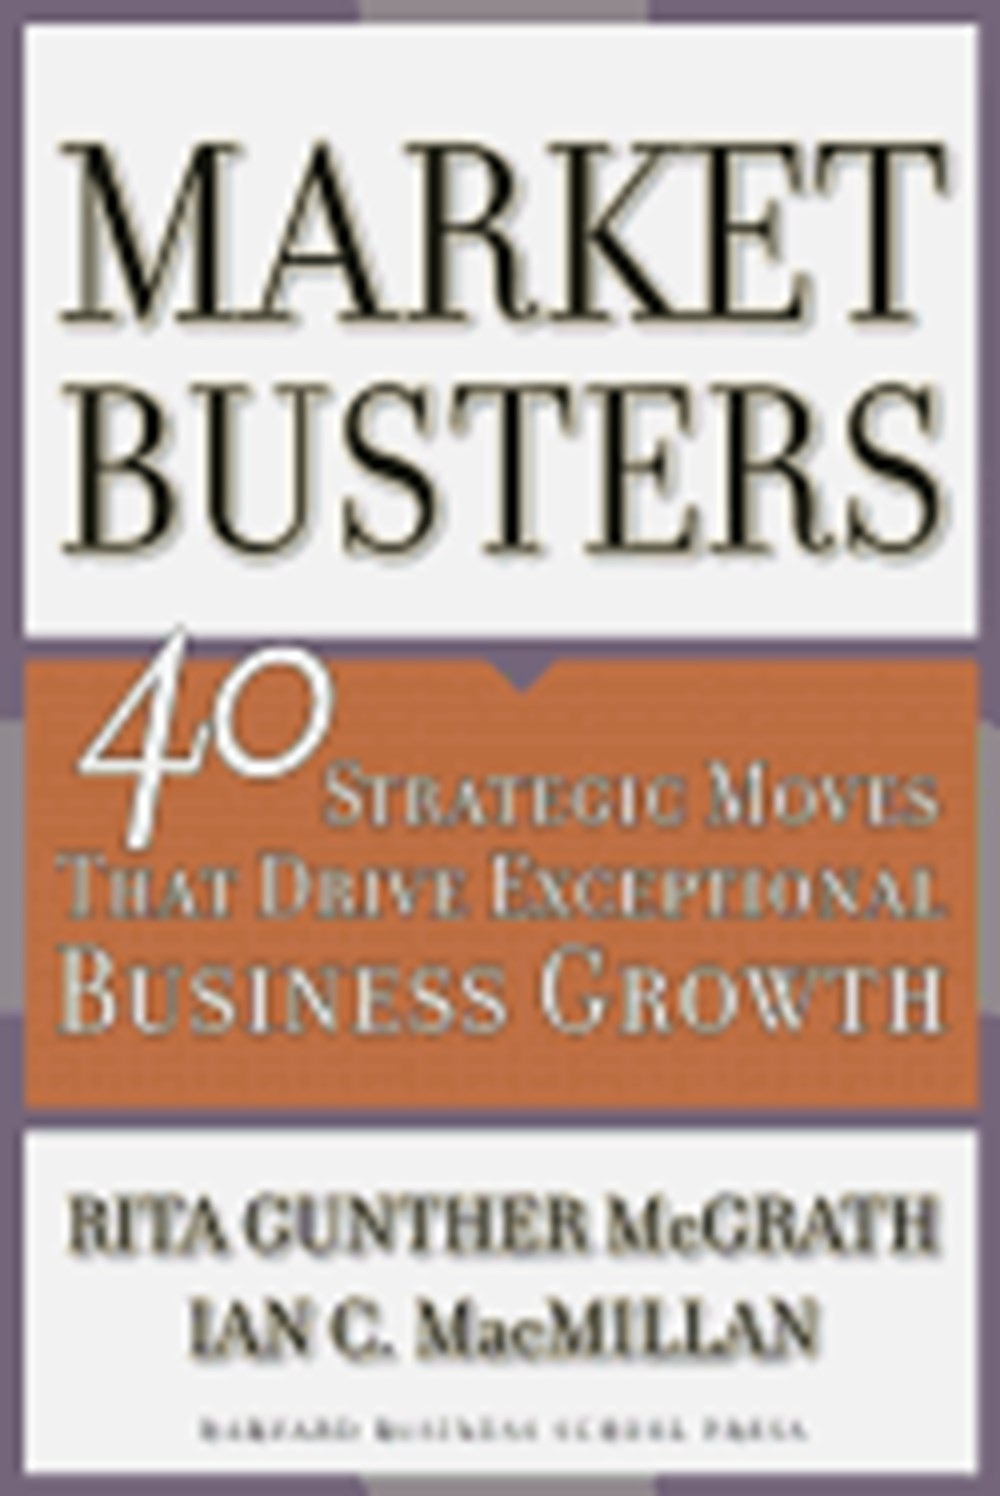 Marketbusters 40 Strategic Moves That Drive Exceptional Business Growth